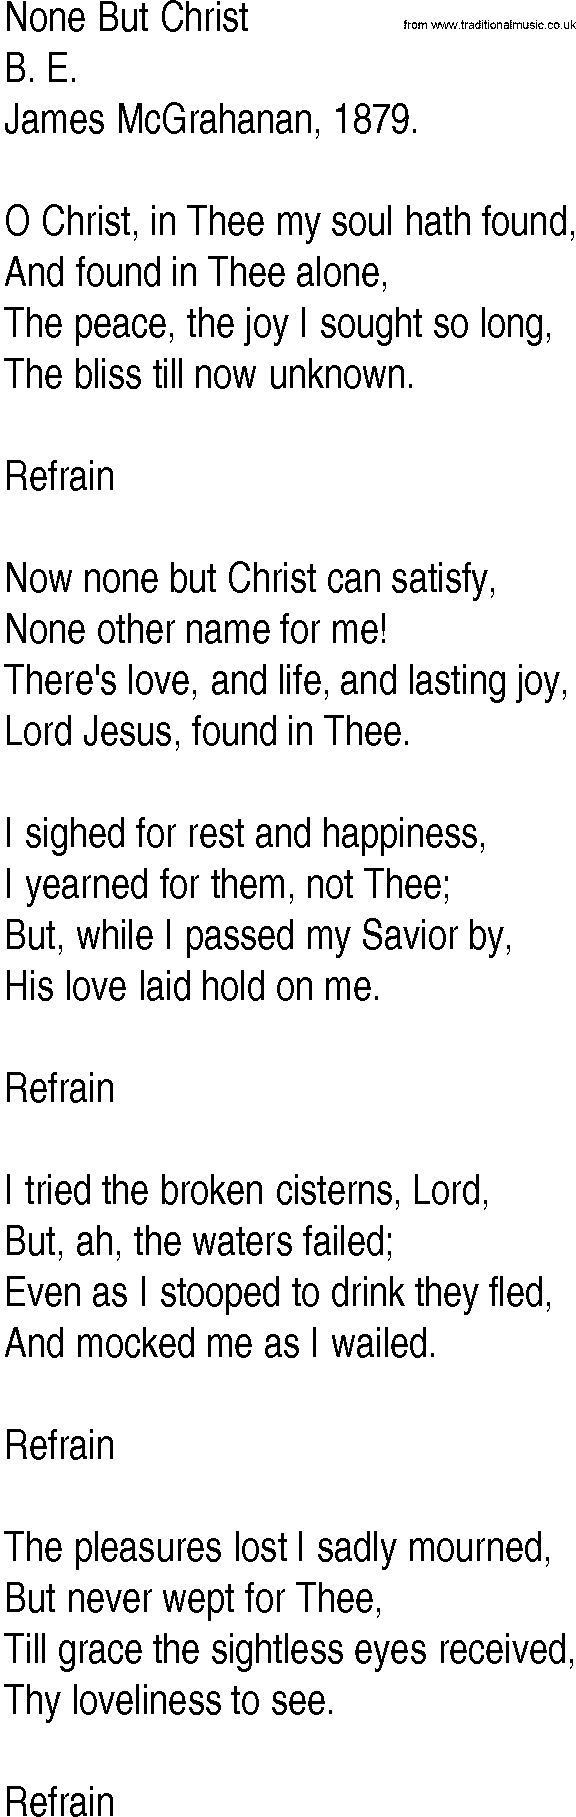 Hymn and Gospel Song: None But Christ by B E lyrics